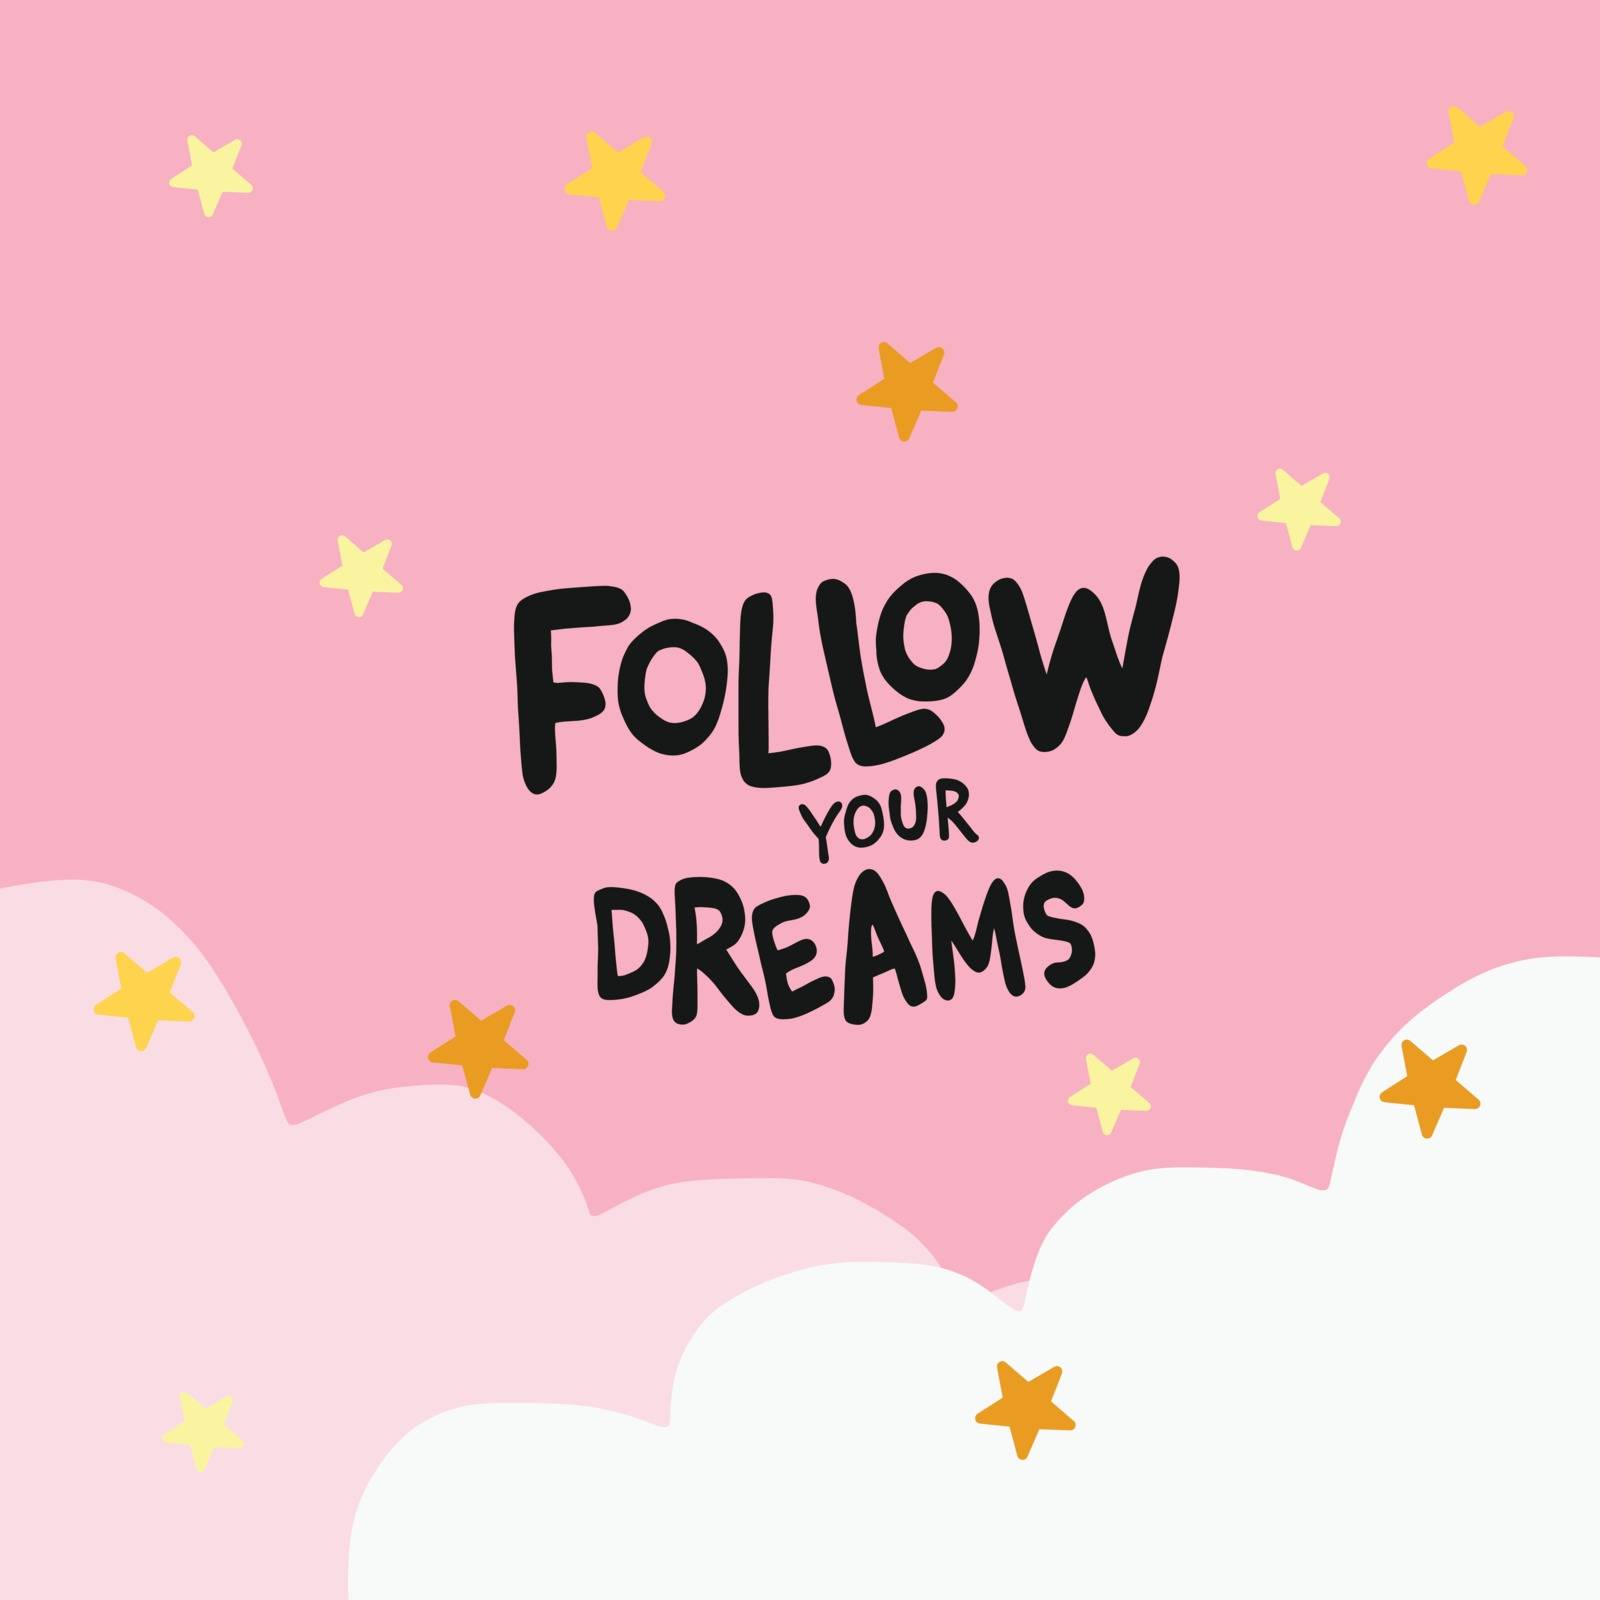 Follow your dream word on cloudy sky and stars vector illustration